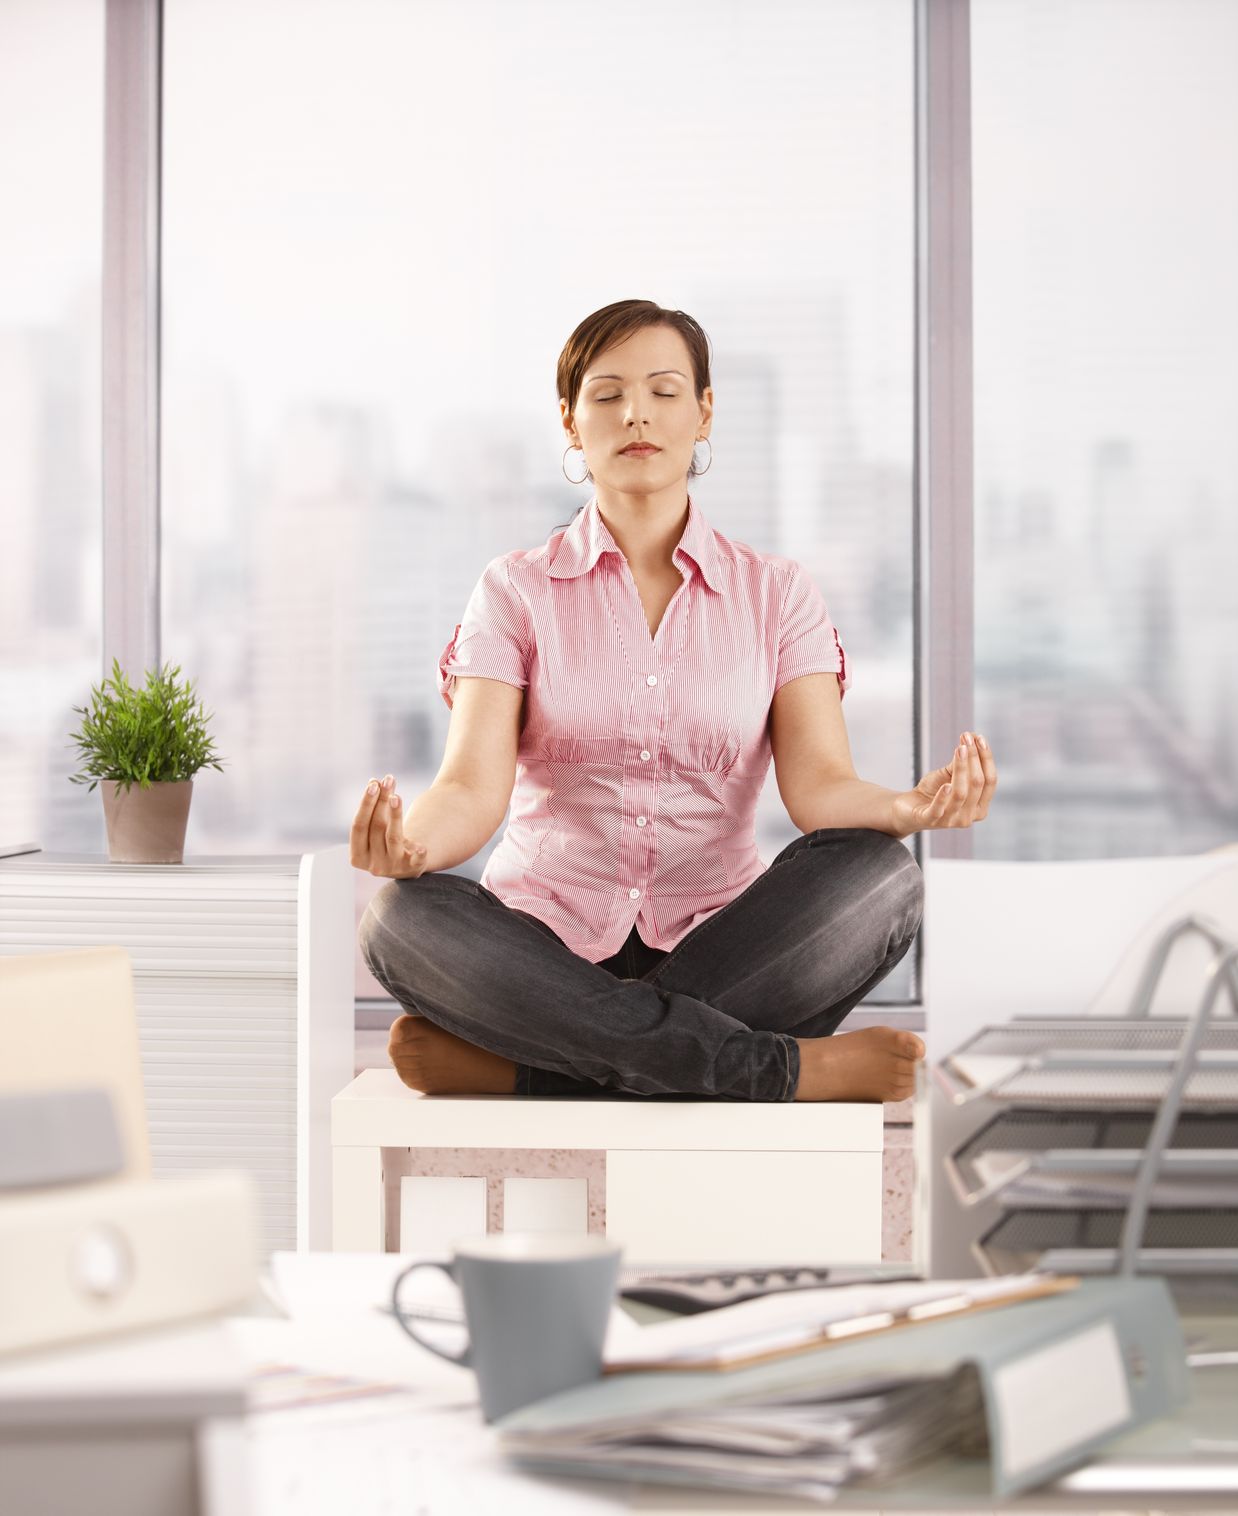 Meditation Provides Natural Pain Relief, Says Study